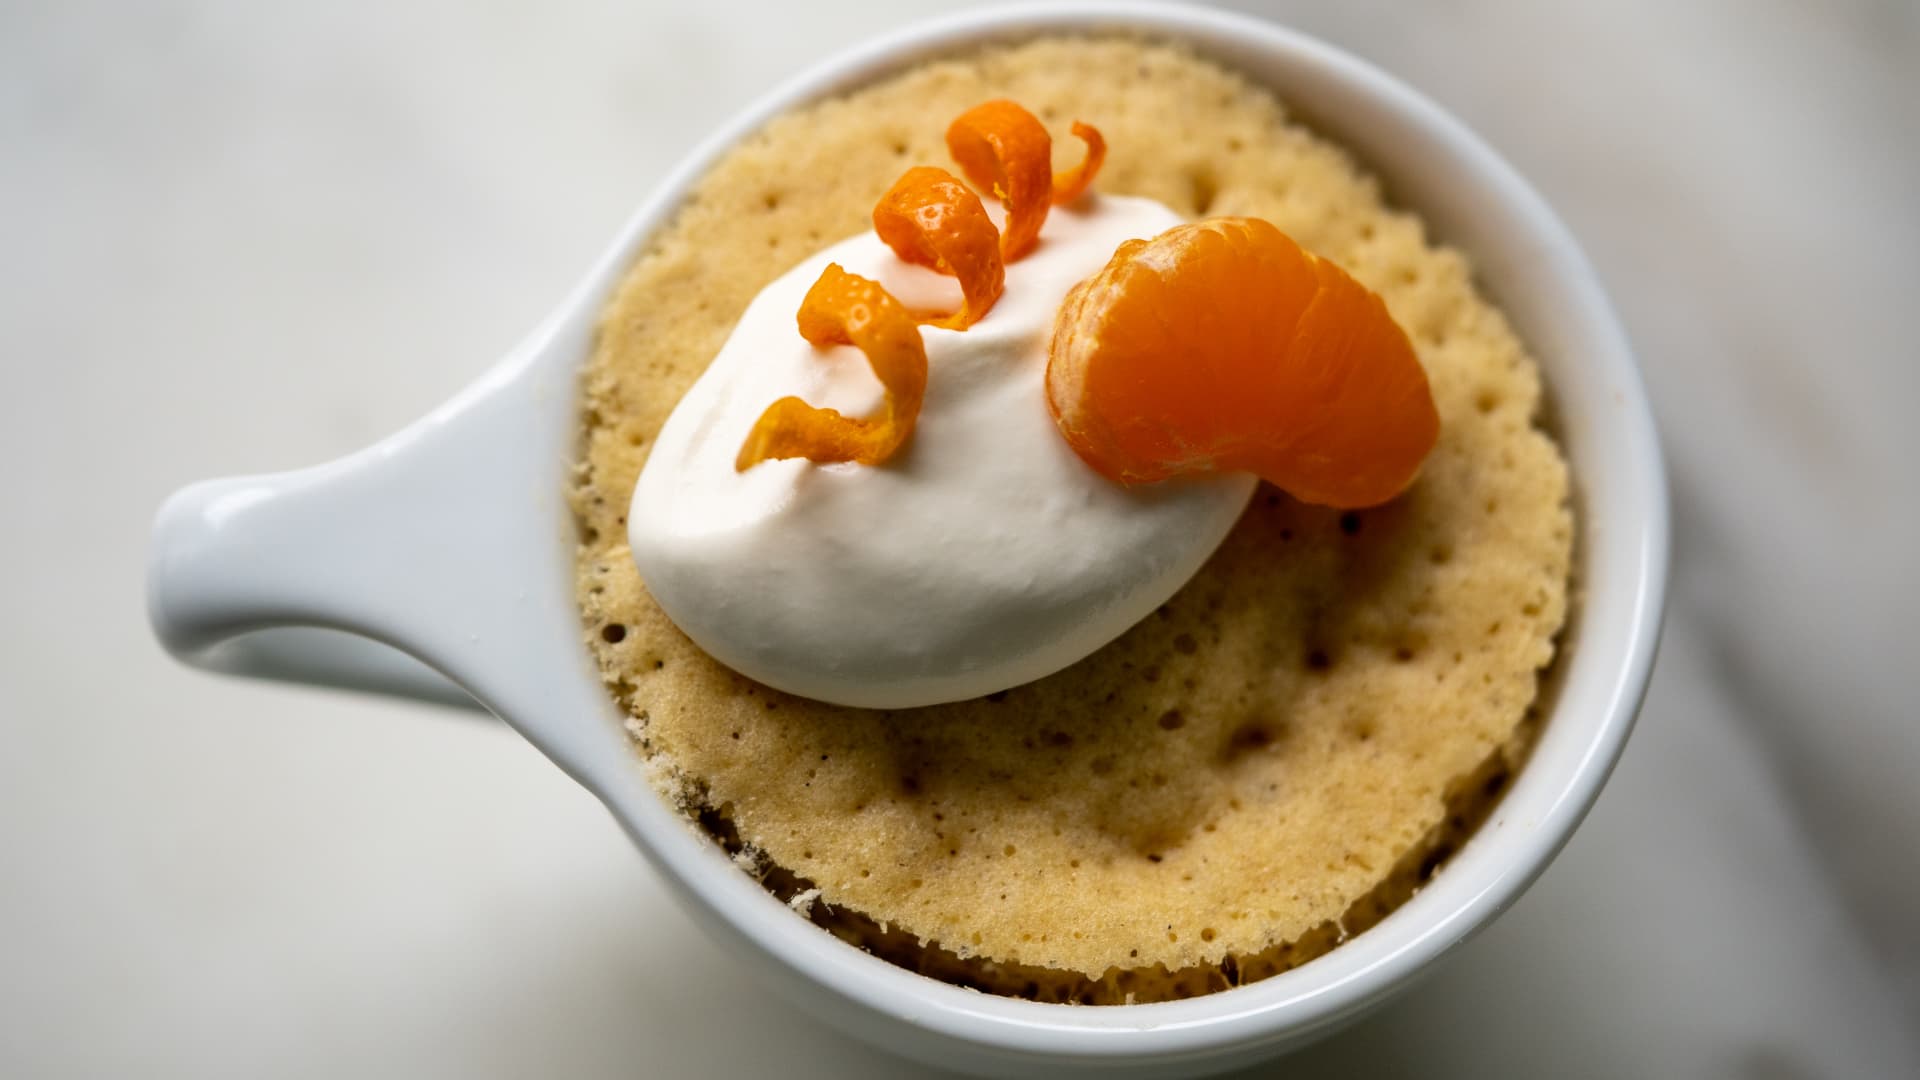 One of my favorites: toasty eggnog-laced cake in a warm mug.